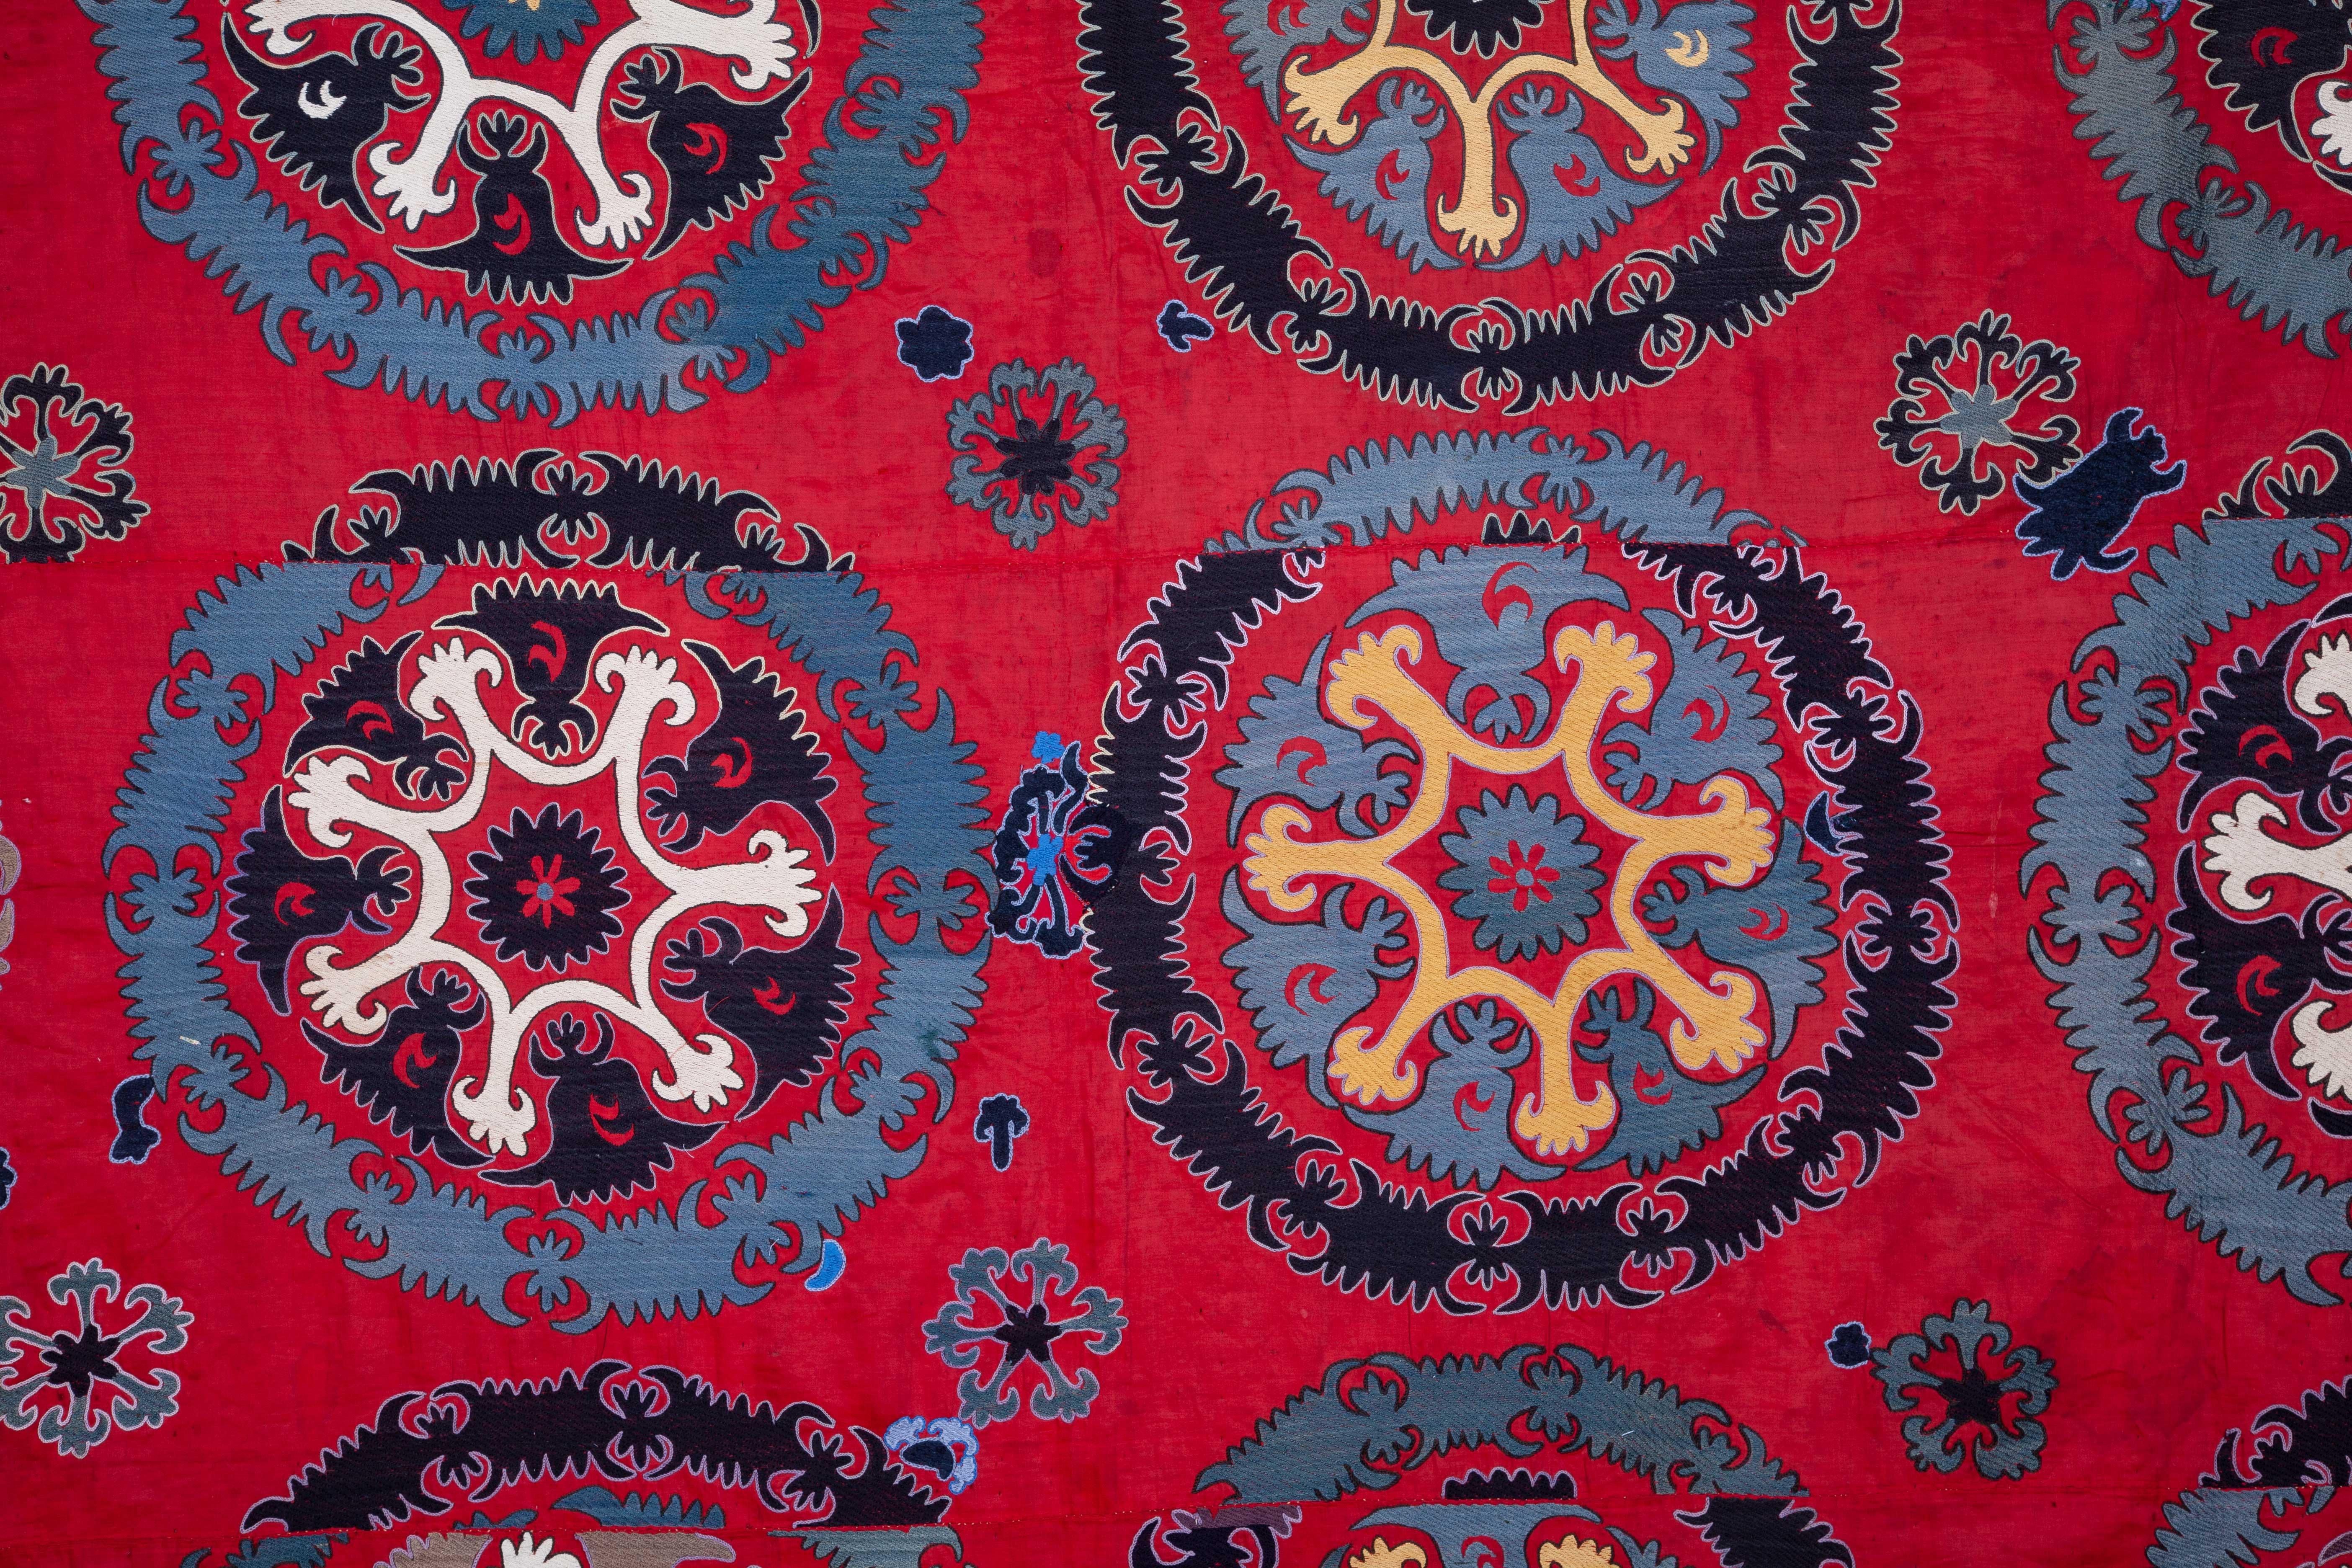 A finely embroidered rare type of Suzani with a patchwork of lining from Russian prints.